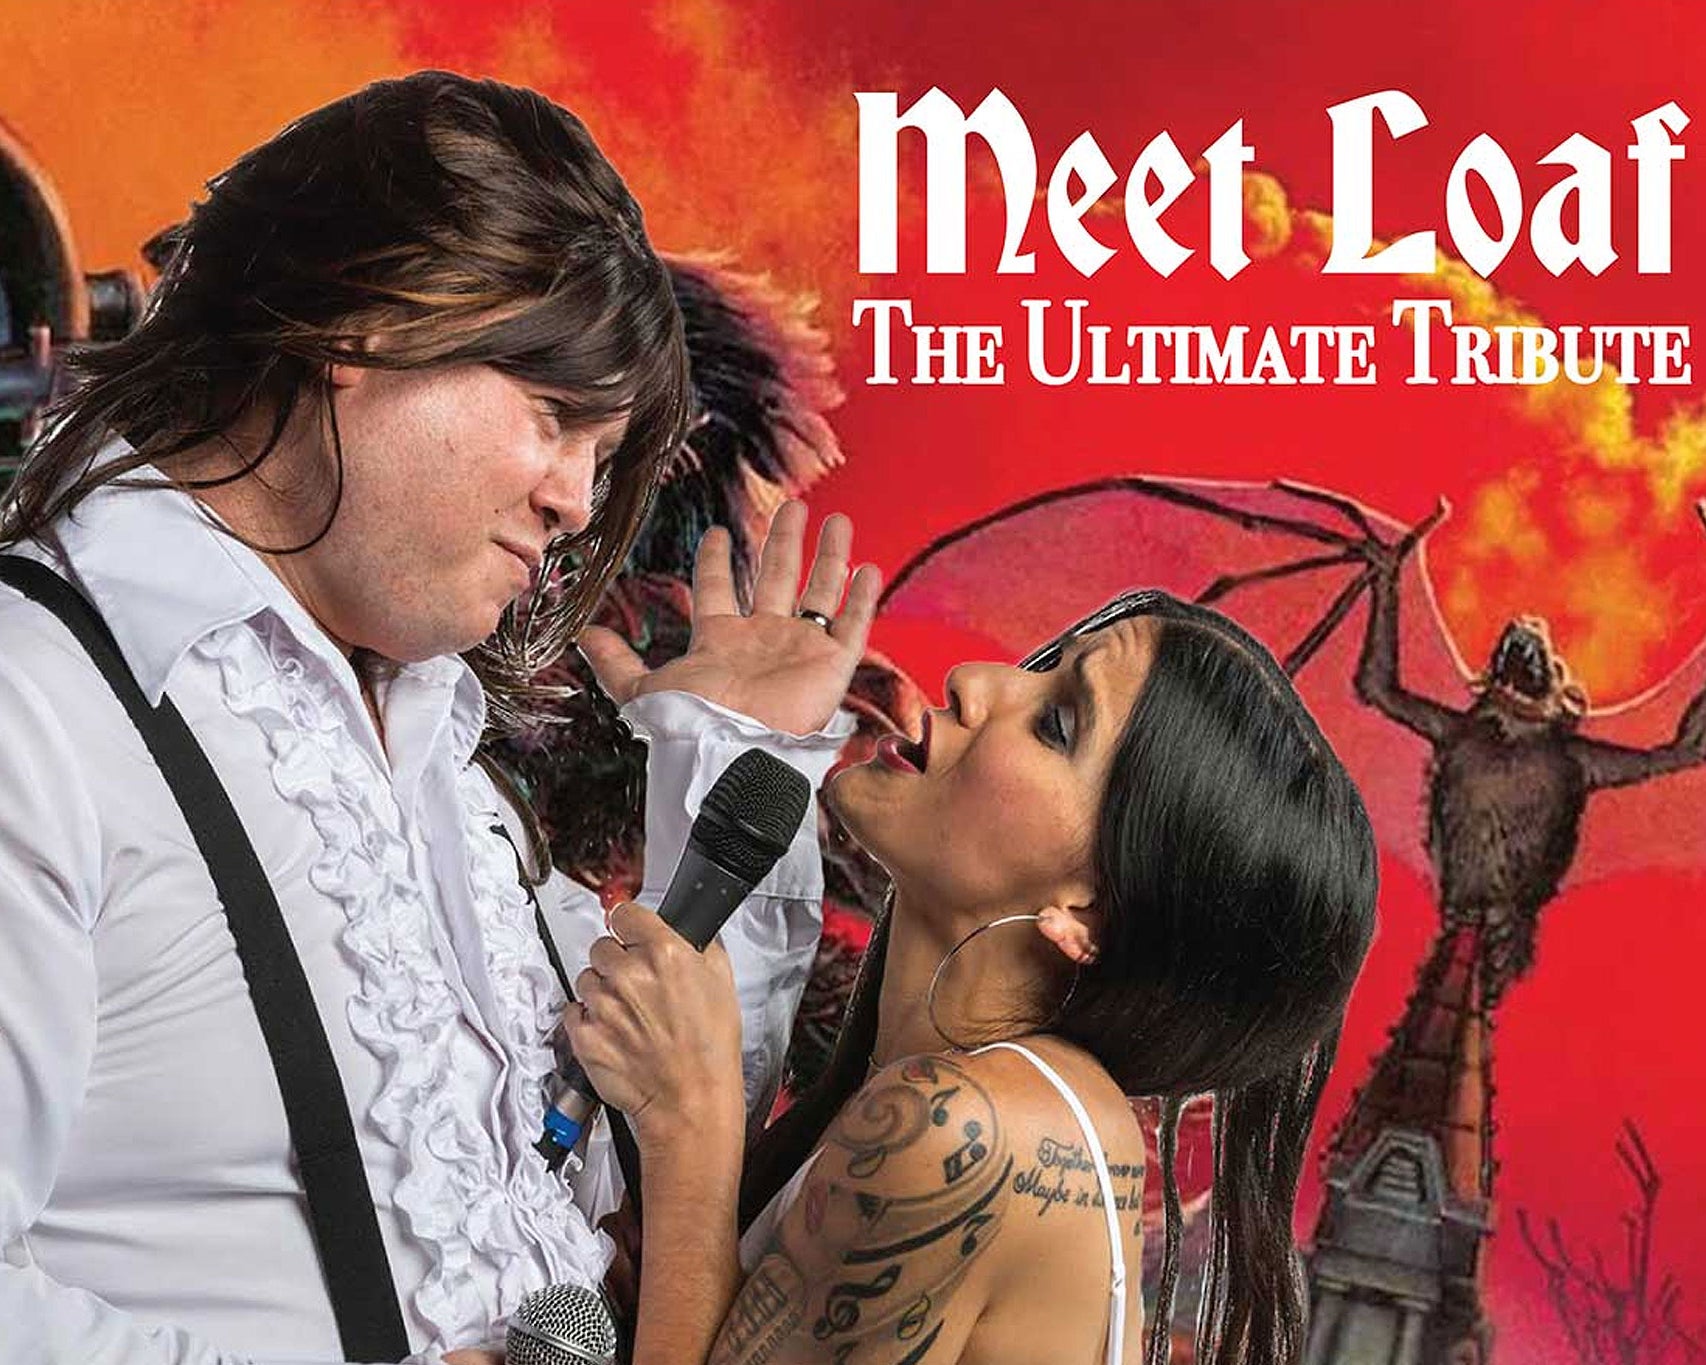 More Info for Meet Loaf: The Ultimate Tribute to Meat Loaf